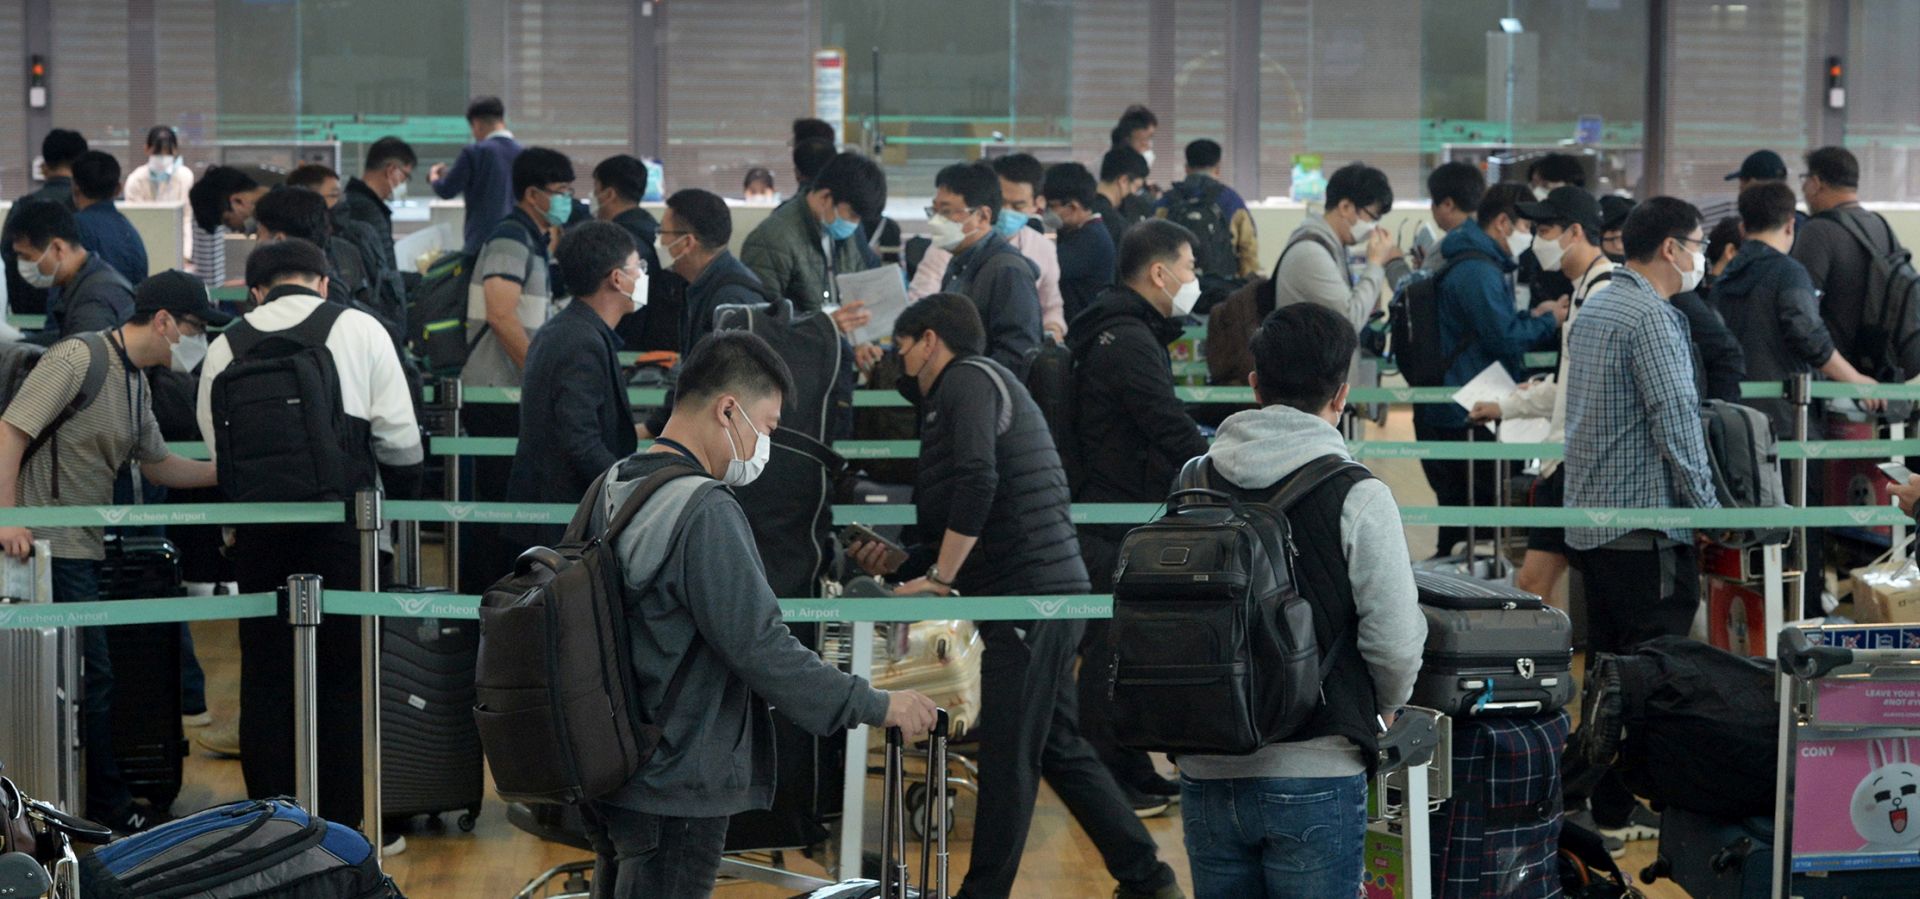 epa08390610 A group of South Korean businessmen wait at check-in counters at Incheon airport, west of Seoul, on April 29, 2020, before their departure for Vietnam. The Southeast Asian country has granted 340 South Korean business travelers exemptions to its coronavirus entry ban. The exemptions came amid Seoul's stepped-up diplomacy to persuade foreign countries to allow essential overseas trips by businessmen, as part of a broader effort to limit the economic repercussions of the COVID-19 pandemic  EPA/YONHAP SOUTH KOREA OUT